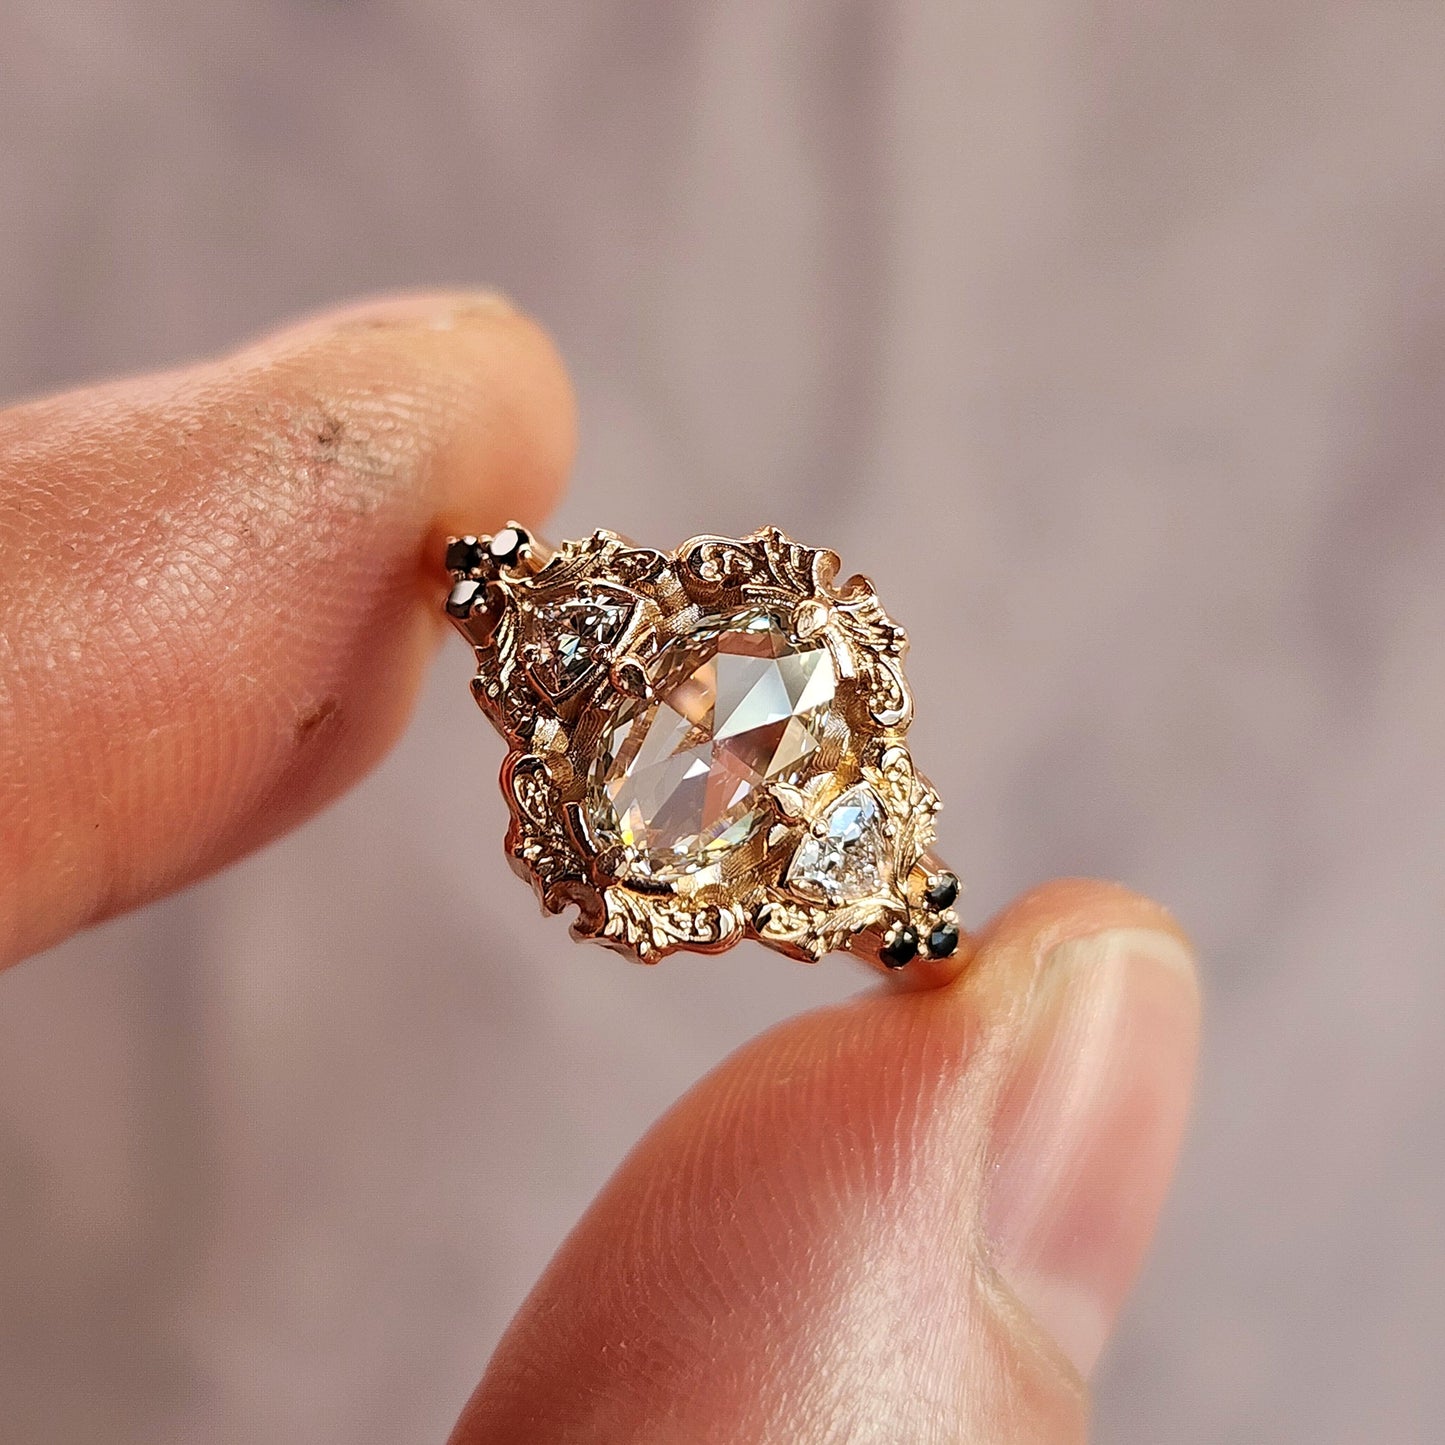 Ophelia rose cut diamond engagement ring 14k rose gold with trillions and black diamonds